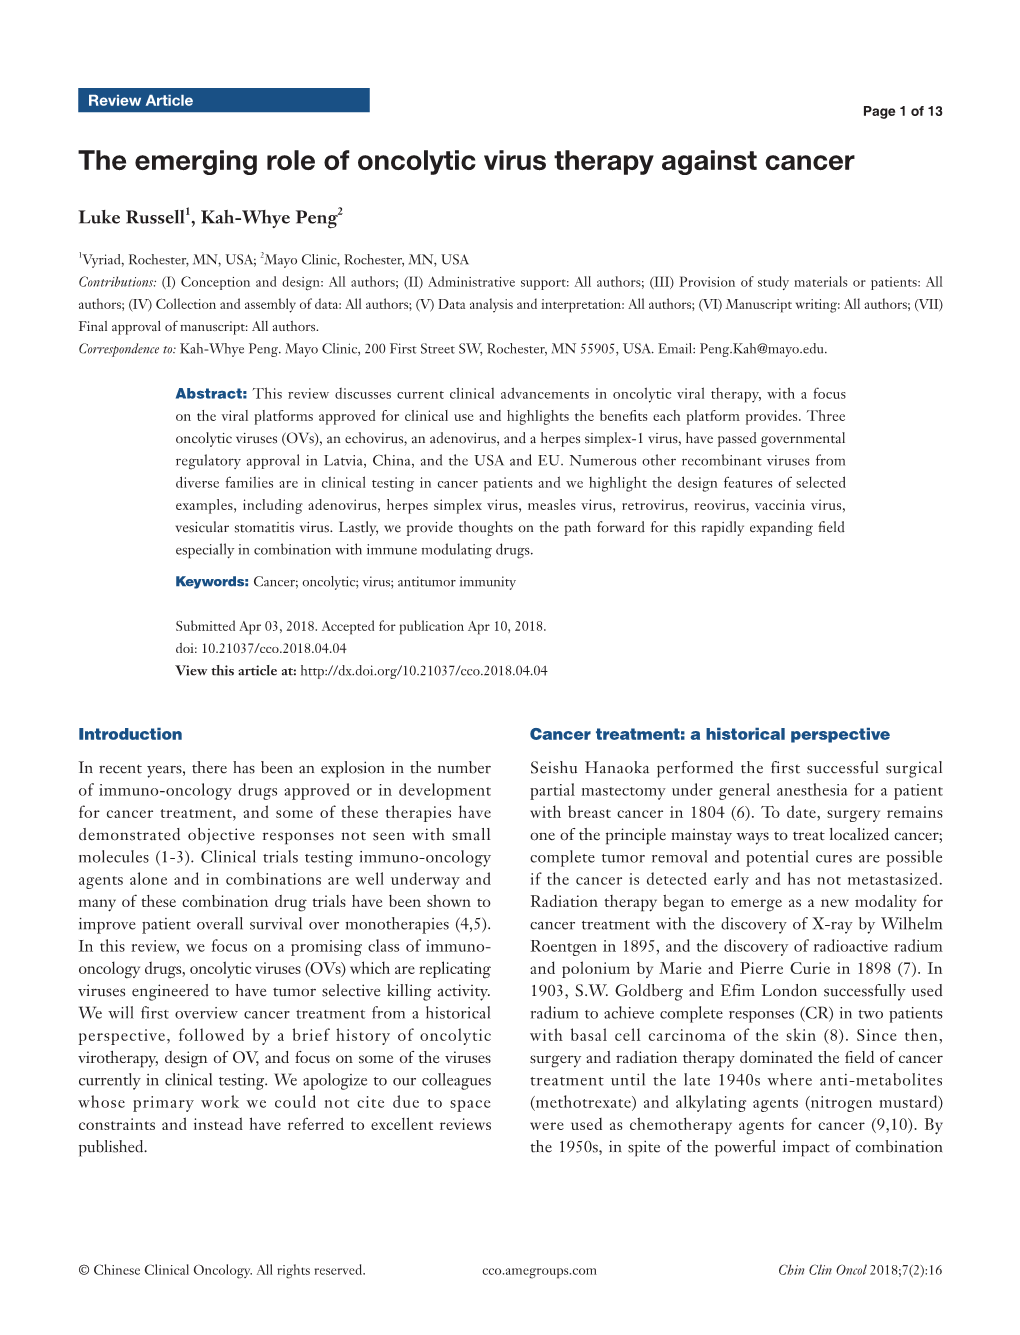 The Emerging Role of Oncolytic Virus Therapy Against Cancer